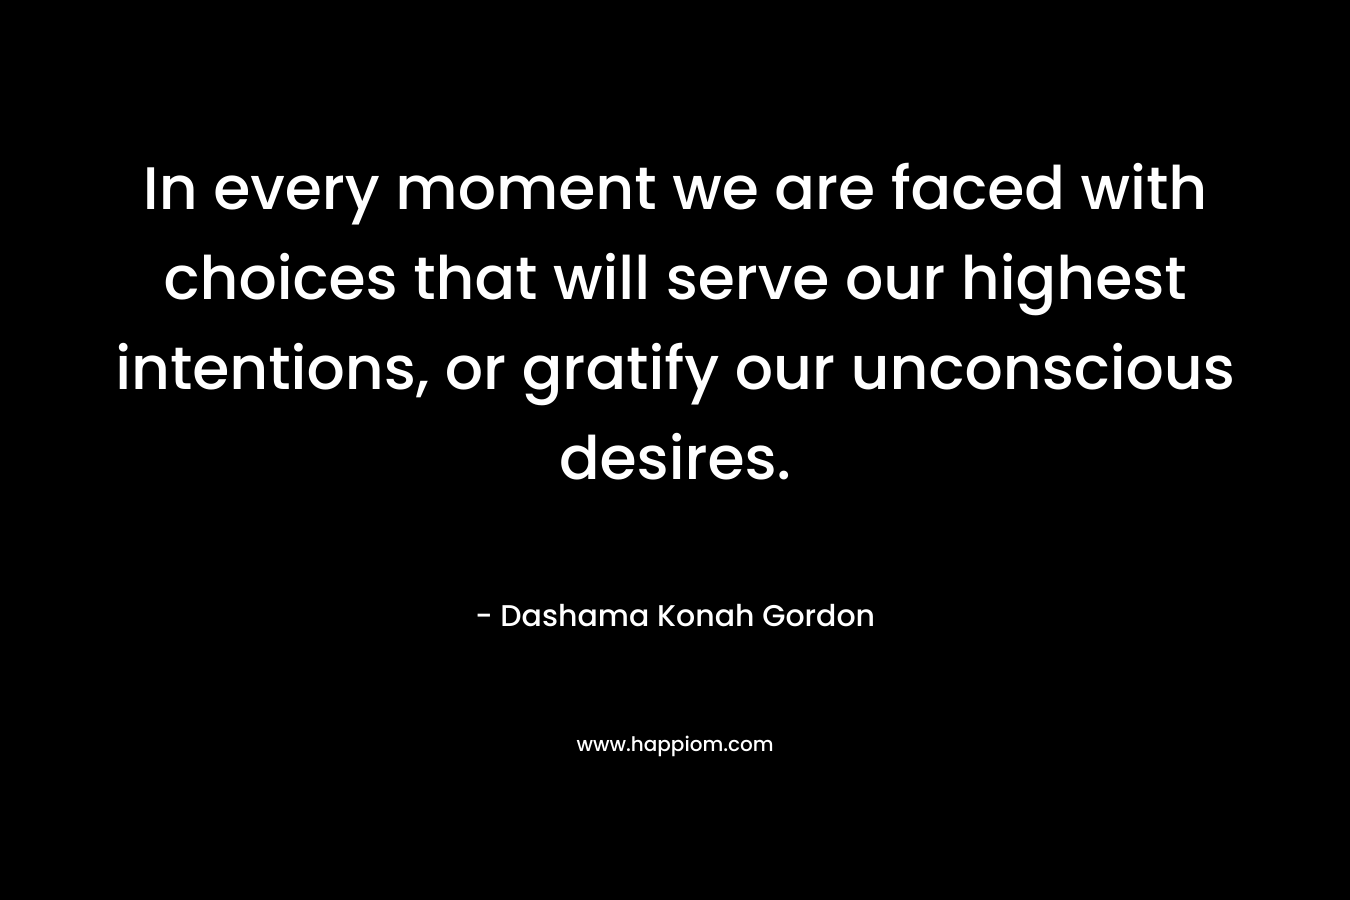 In every moment we are faced with choices that will serve our highest intentions, or gratify our unconscious desires. – Dashama Konah Gordon